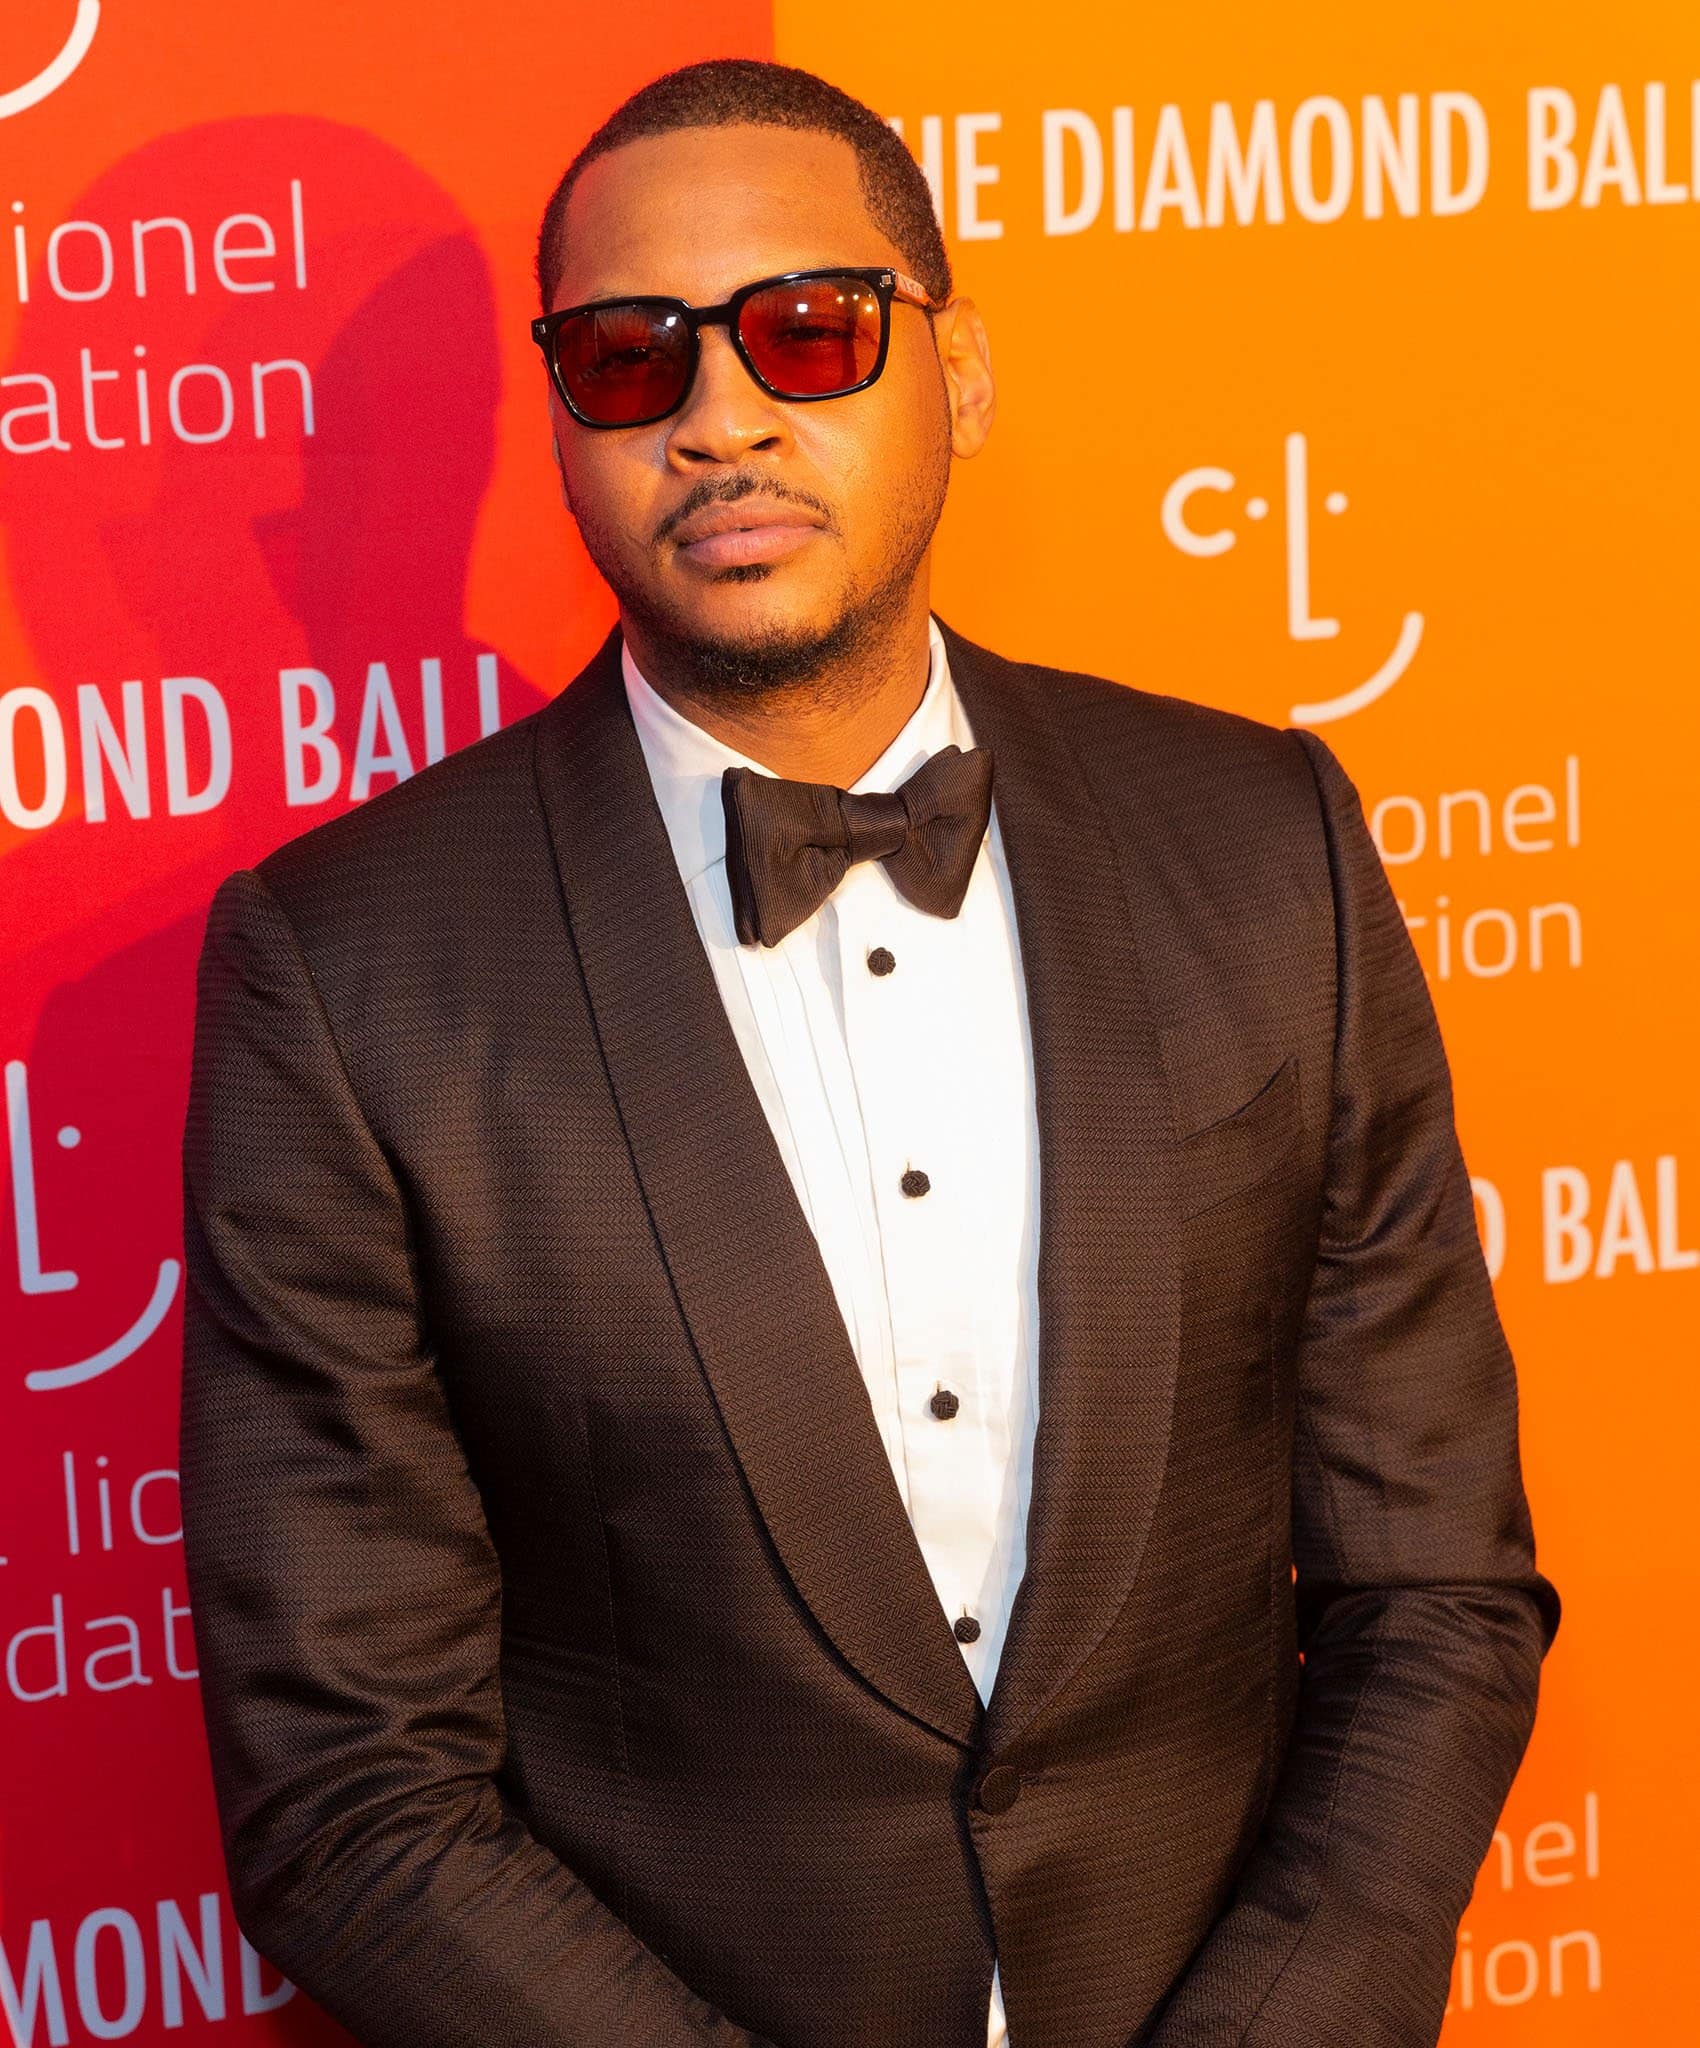 Carmelo Anthony is a professional basketball player for the Los Angeles Lakers of the NBA